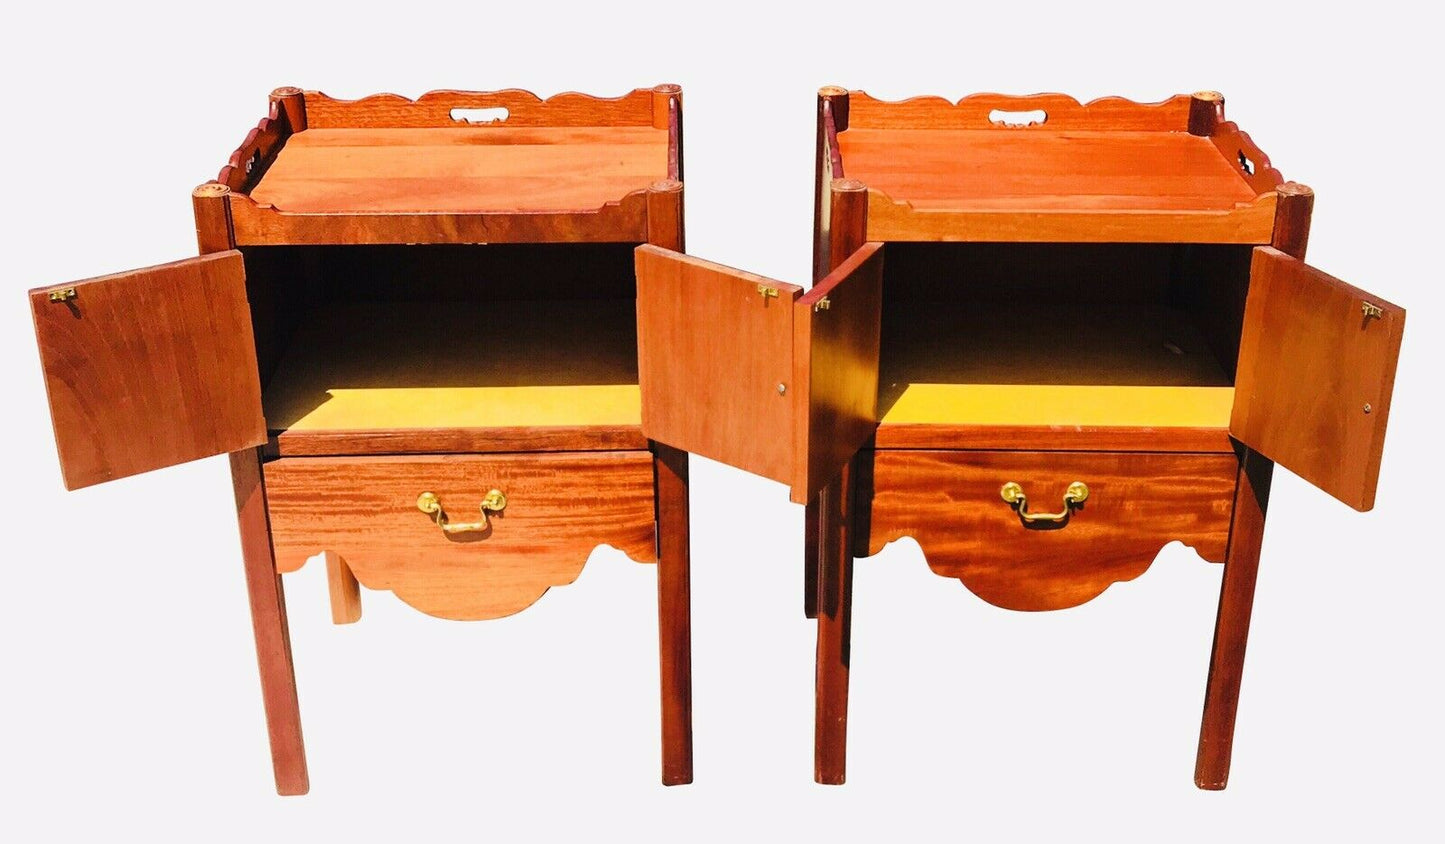 20TH C ANTIQUE STYLE PAIR OF MAHOGANY NIGHTSTANDS / END TABLES ~ BEDSIDE CABINET